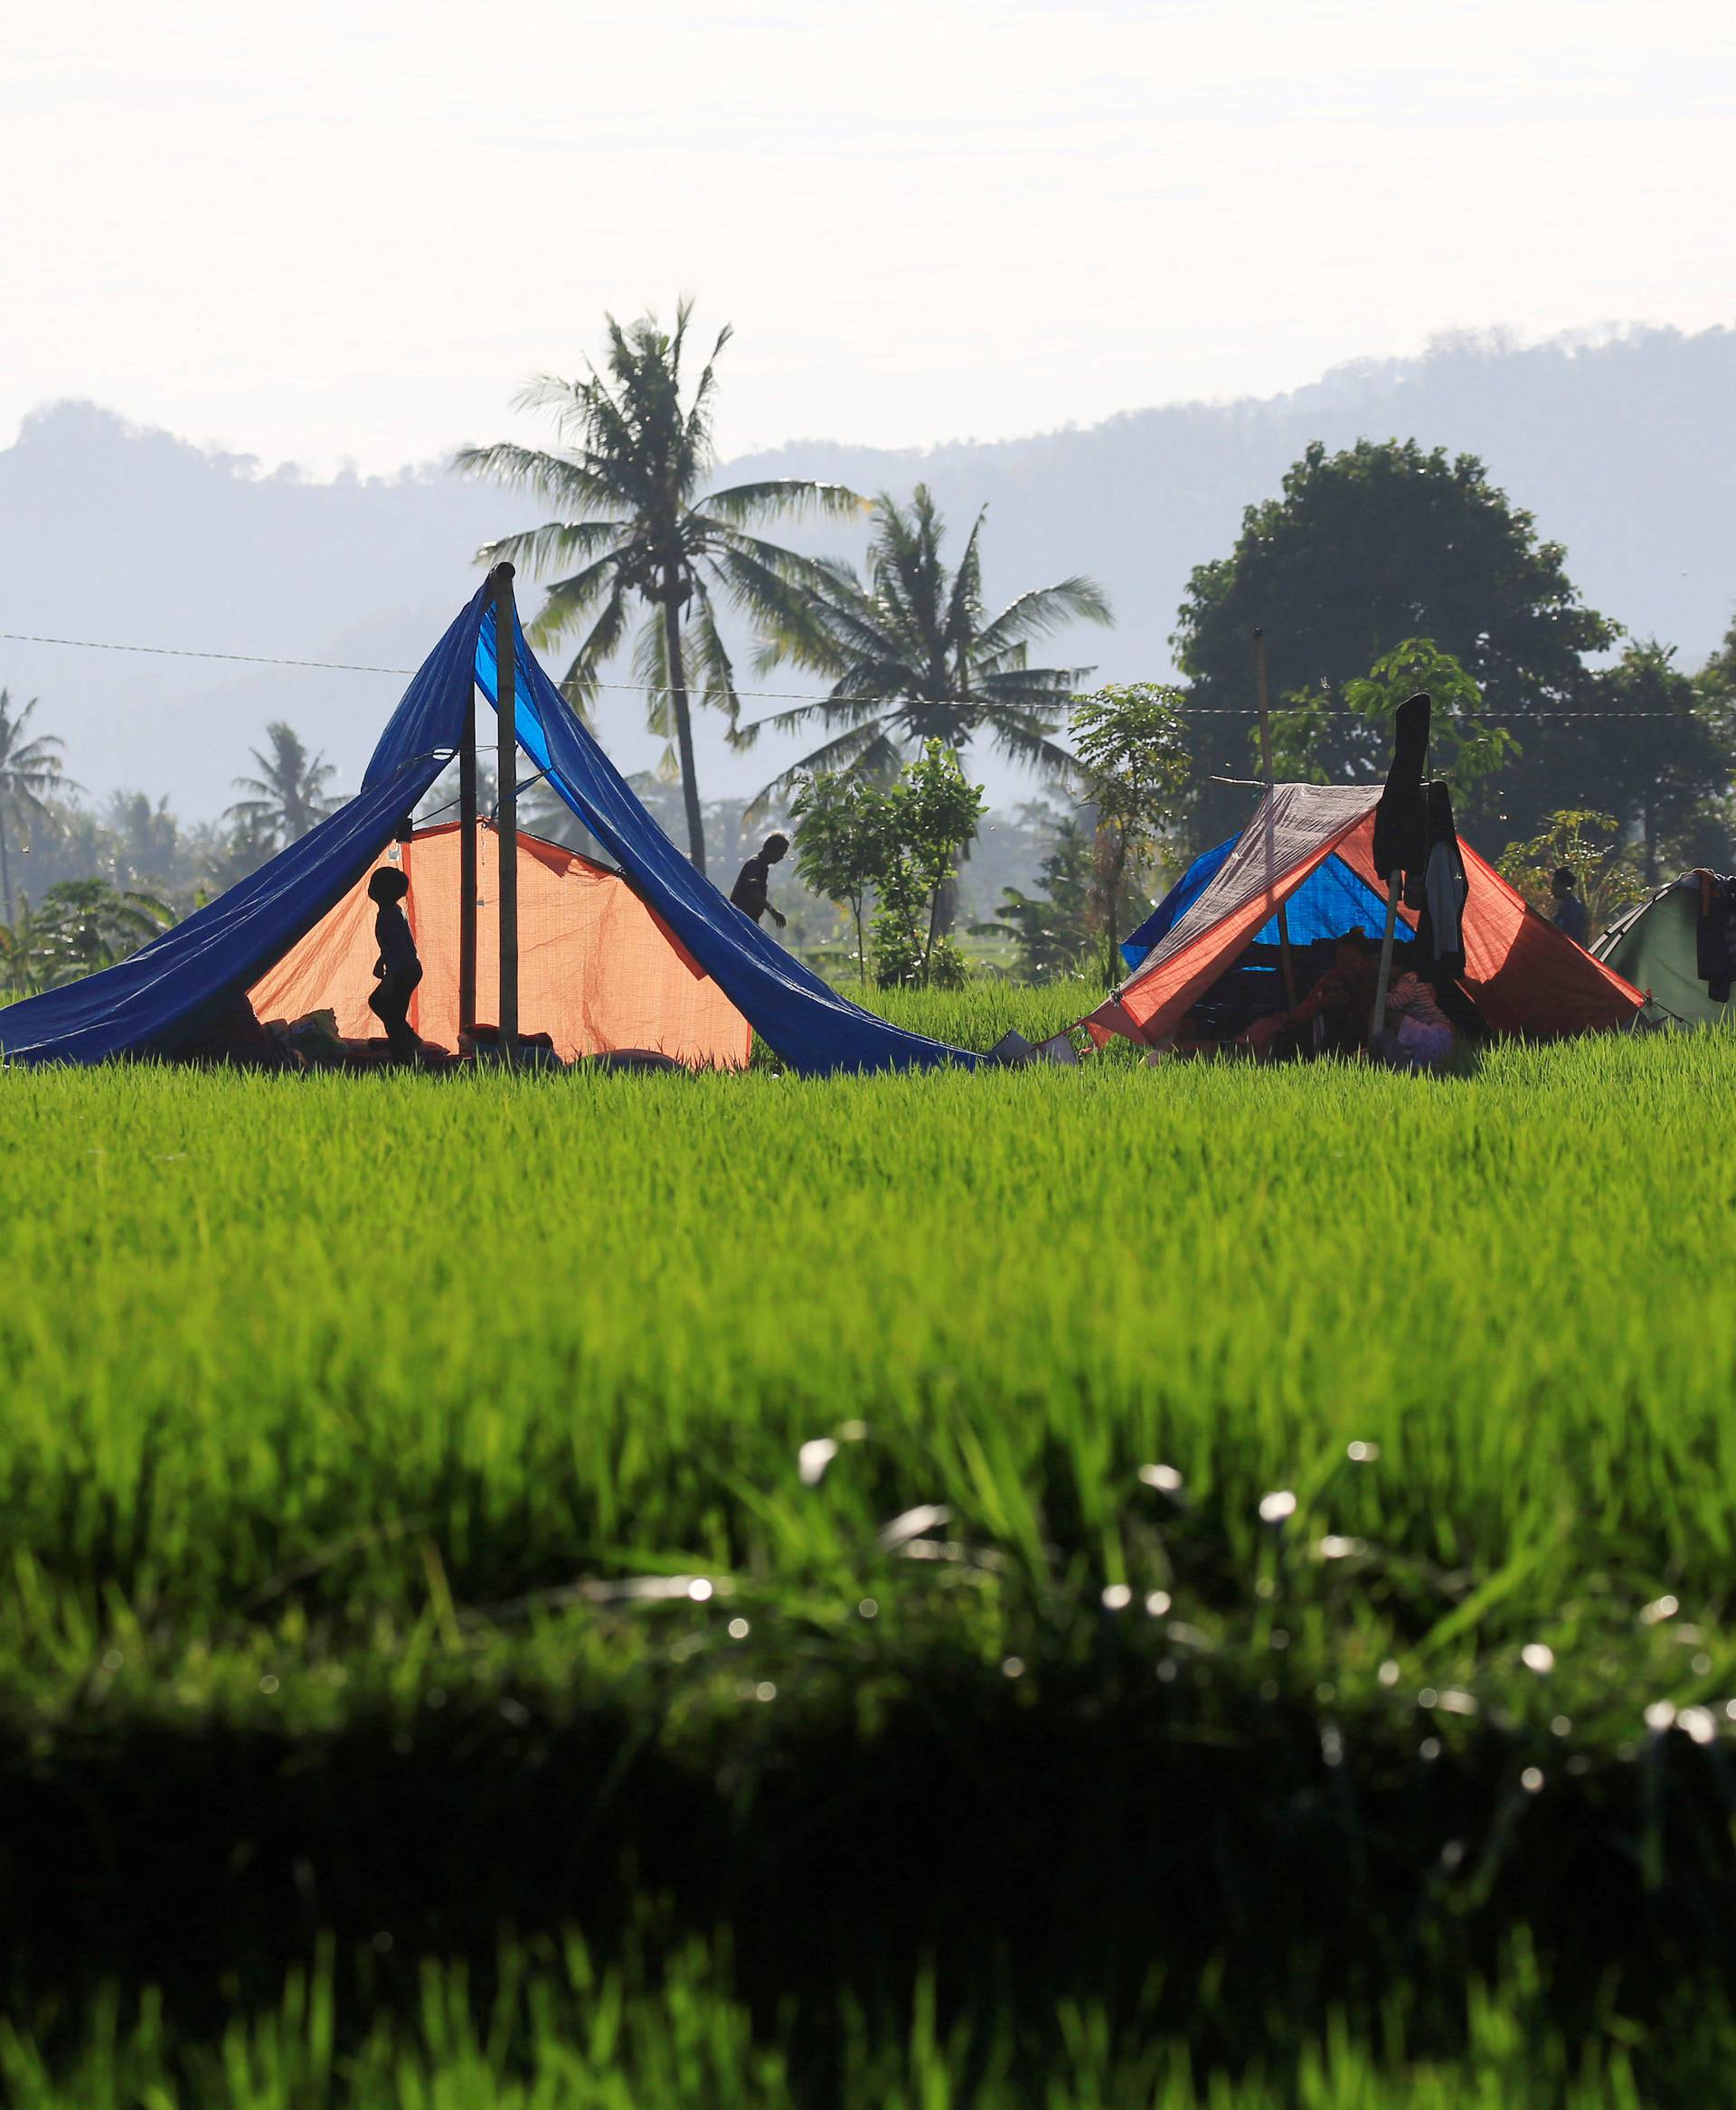 Villagers walk near their temporary shelter after an earthquake hit on Sunday in Pemenang